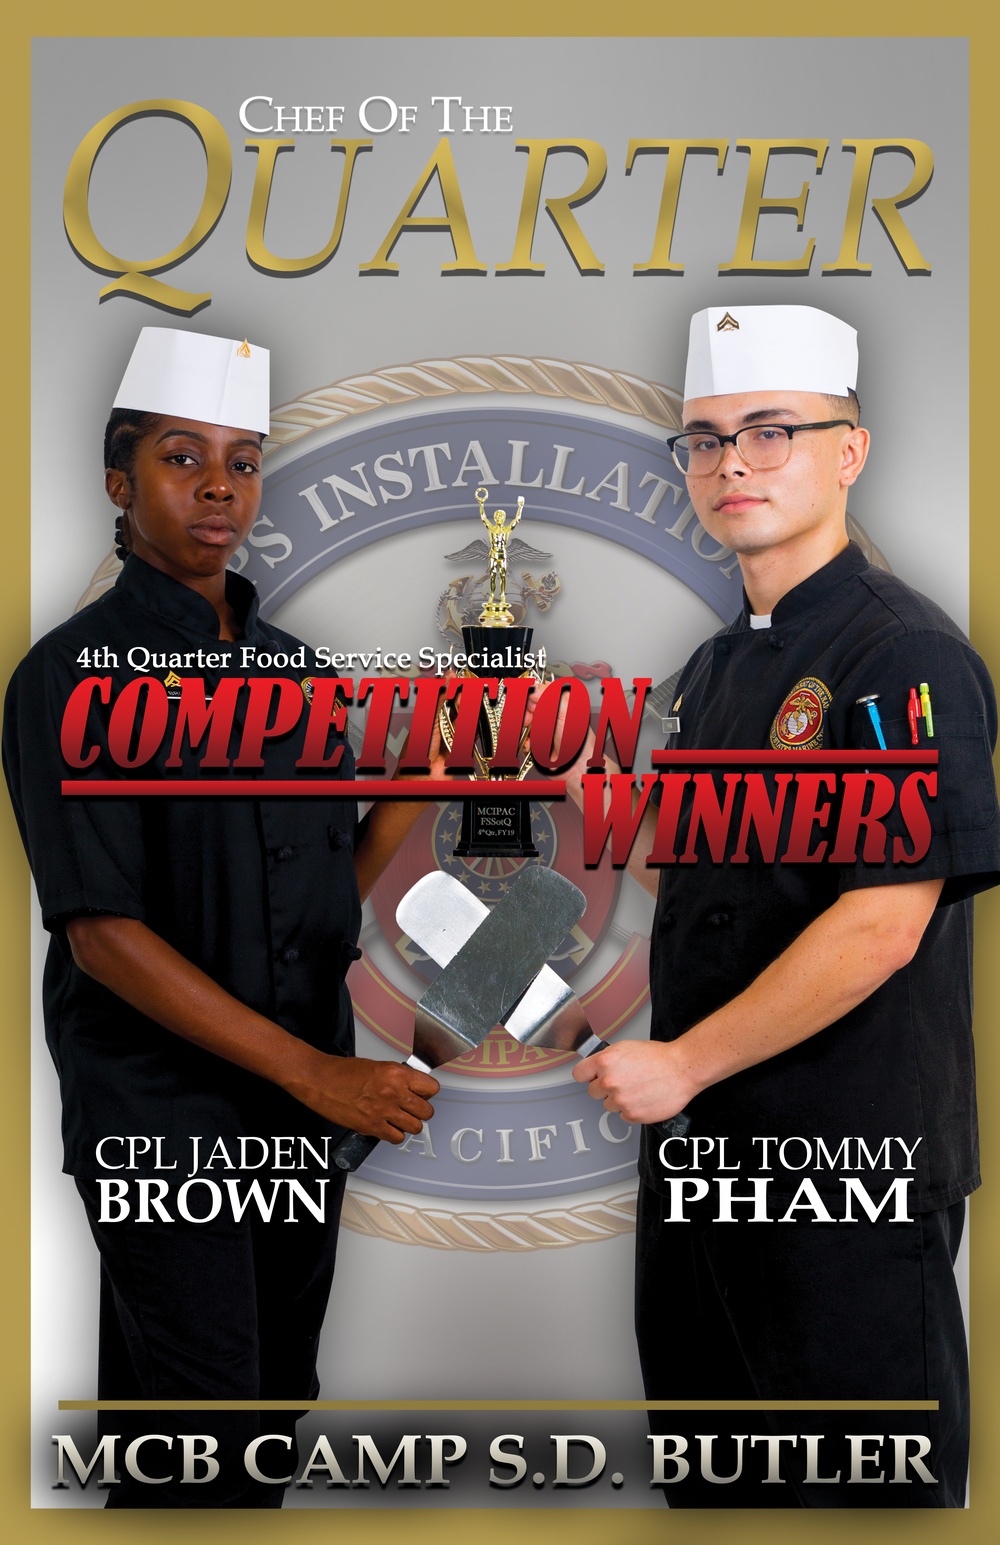 Poster Highlights 4th Quarter Food Service Specialist Competition Winners